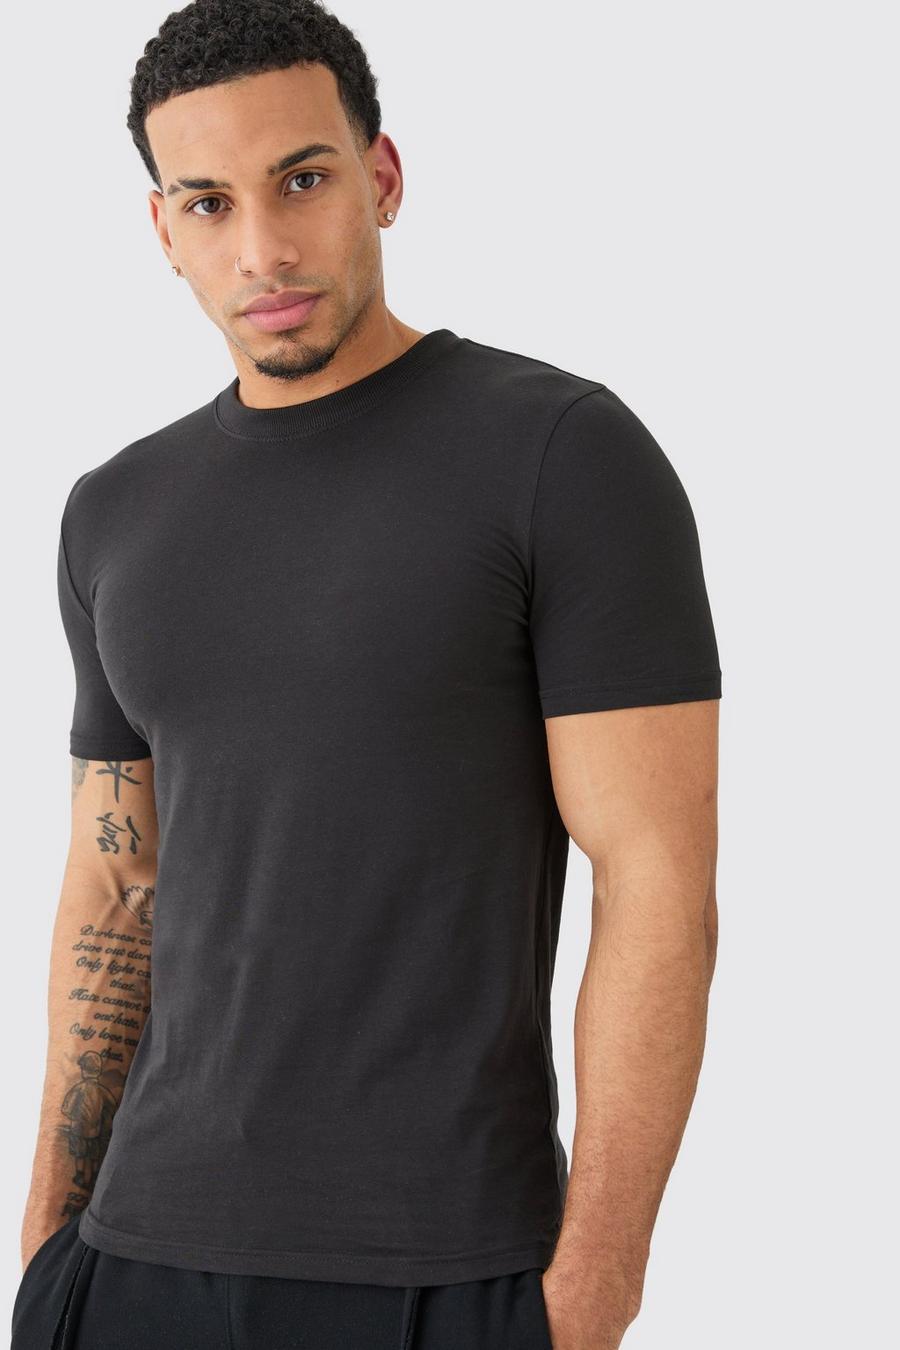 Black T-shirt i muscle fit